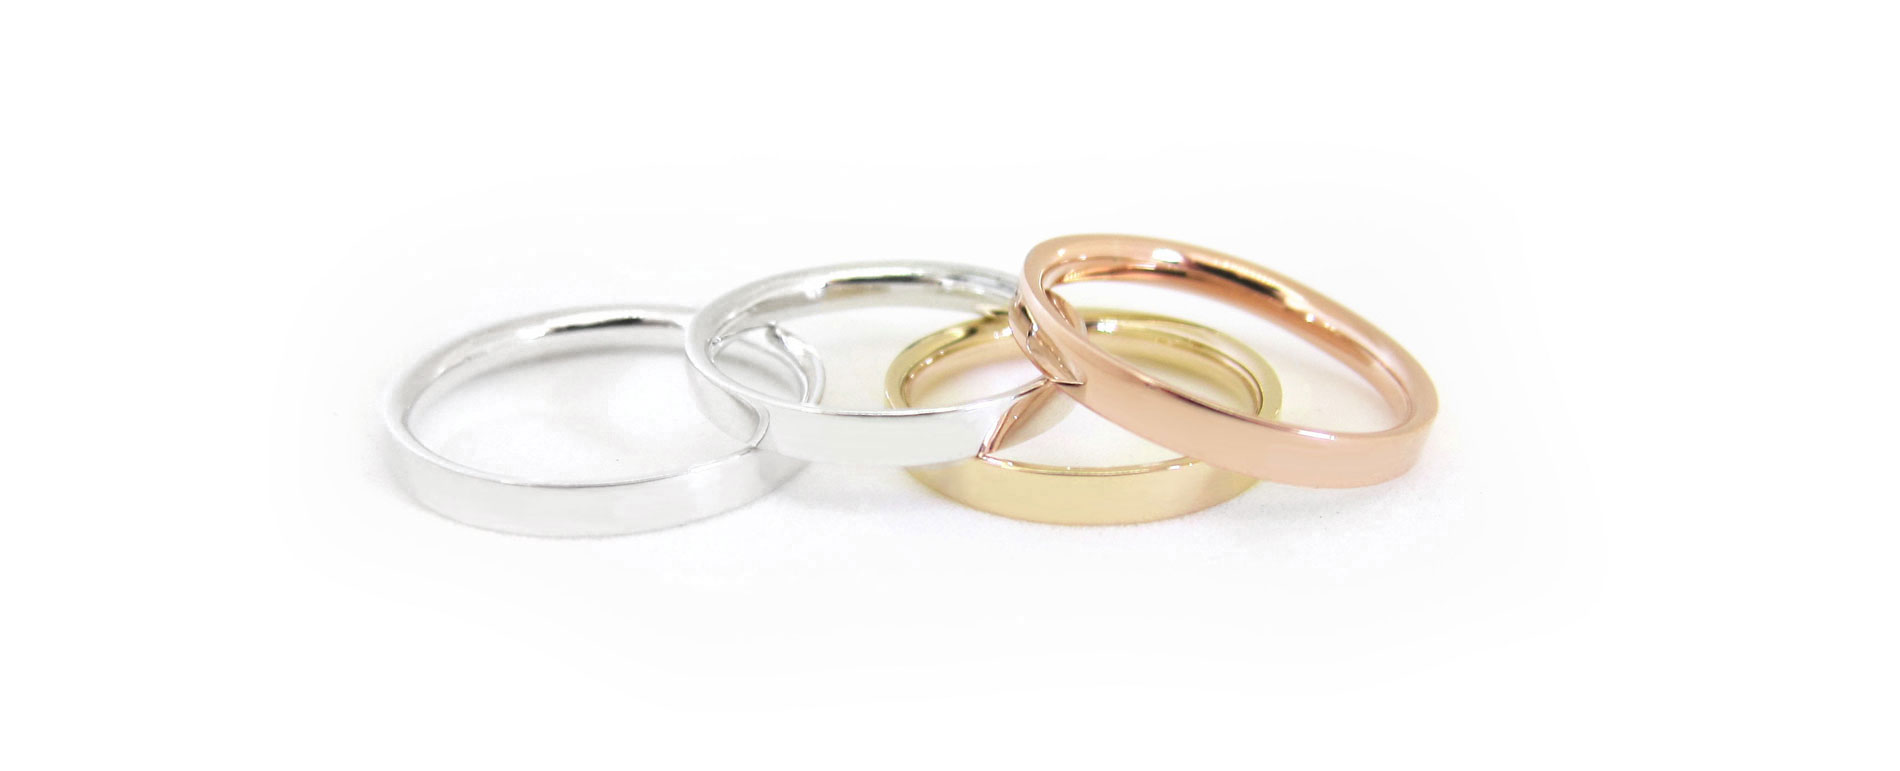 Rose gold, yellow gold and white gold wedding bands